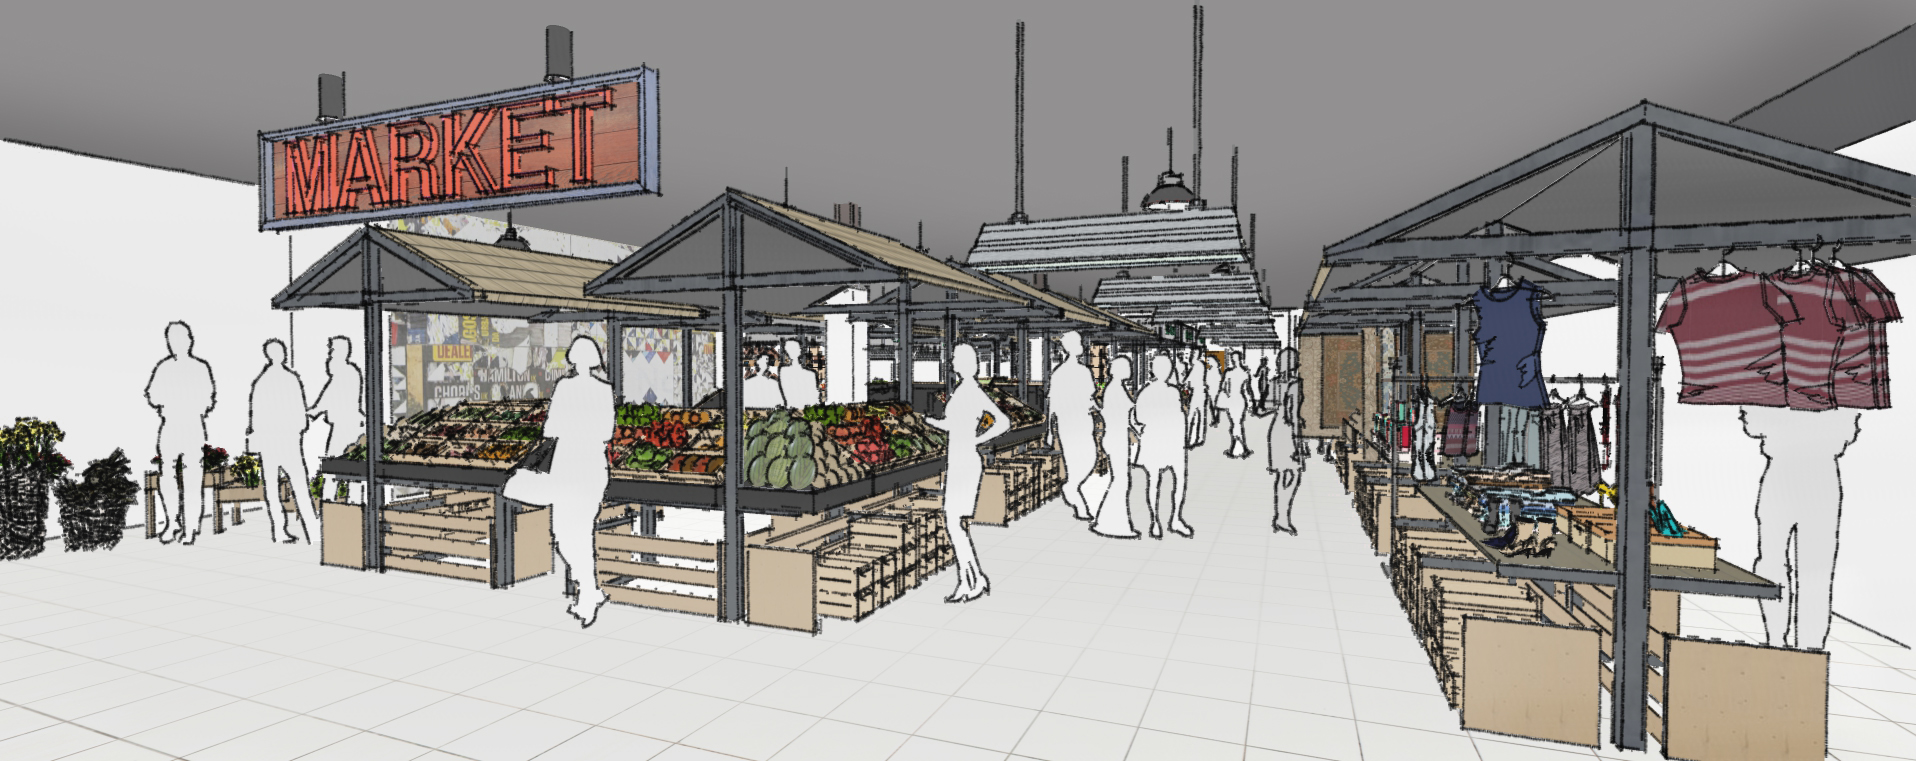 Council seeks to invest in Worksop Market